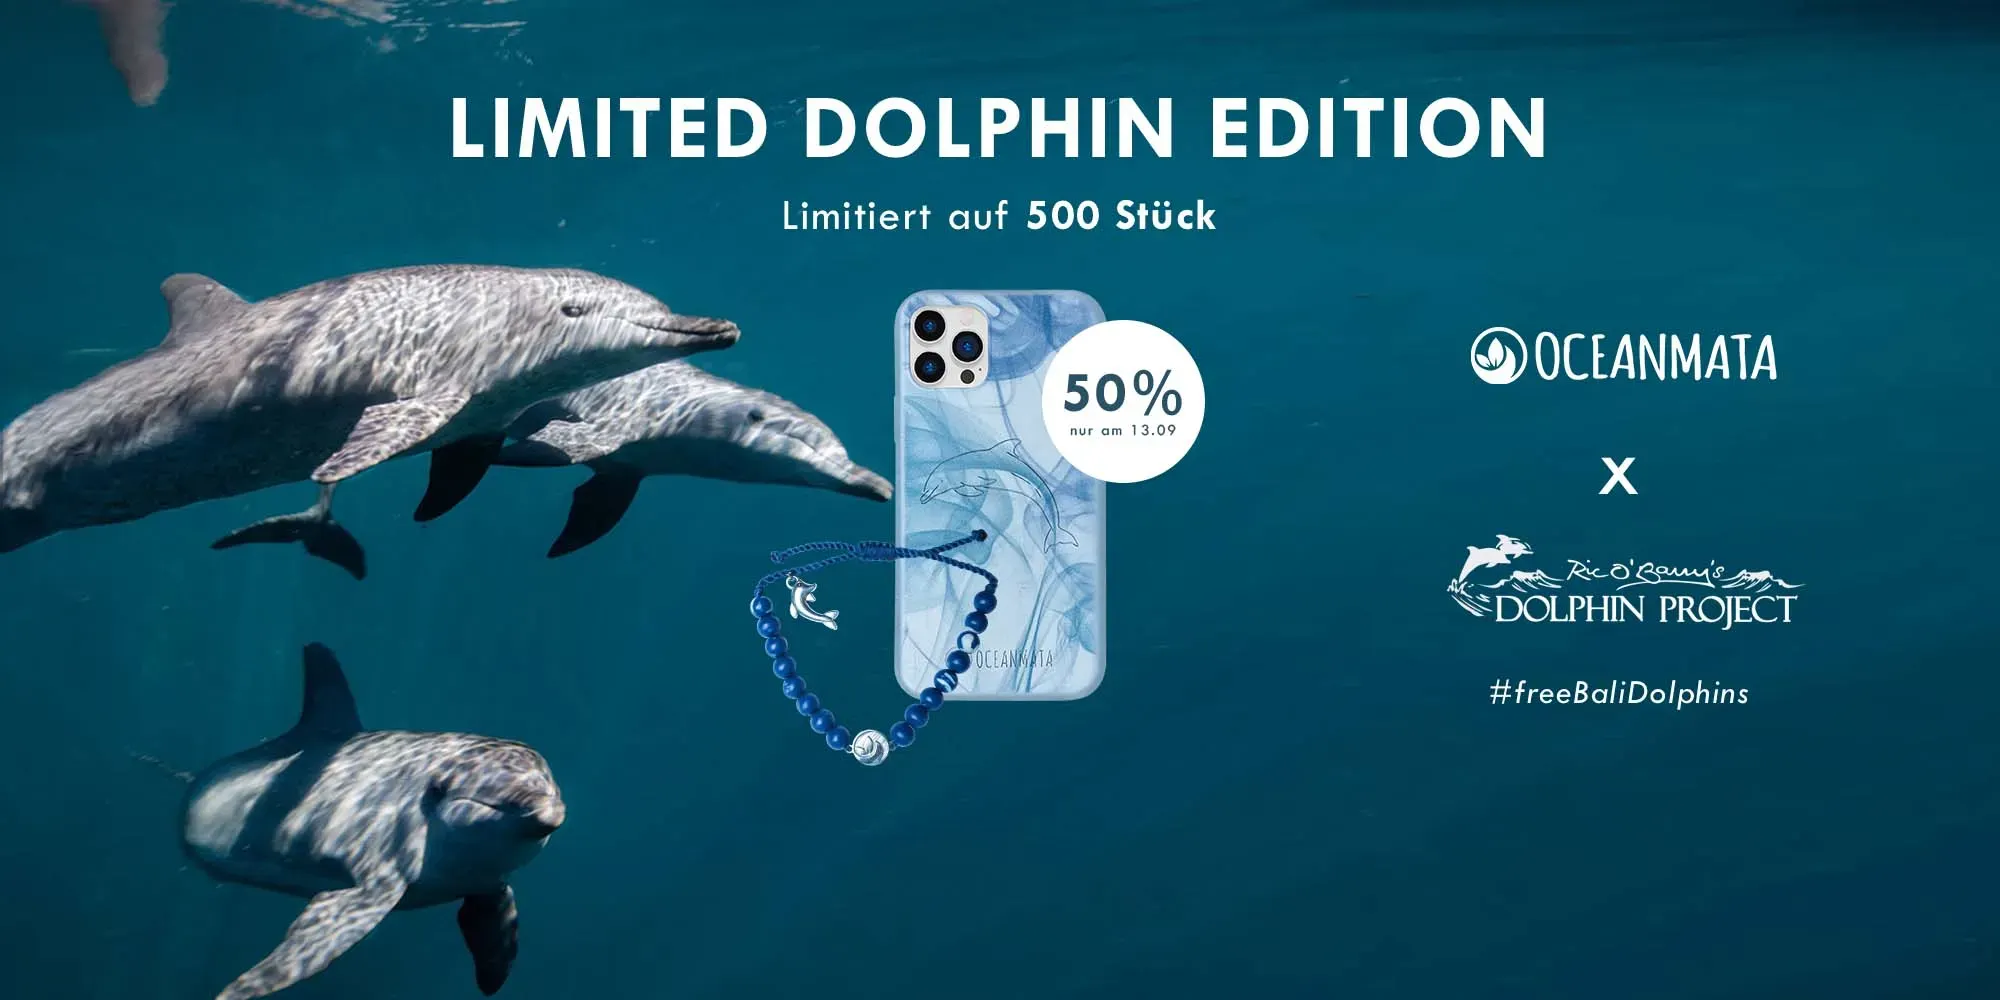 Limited Dolphin Edition